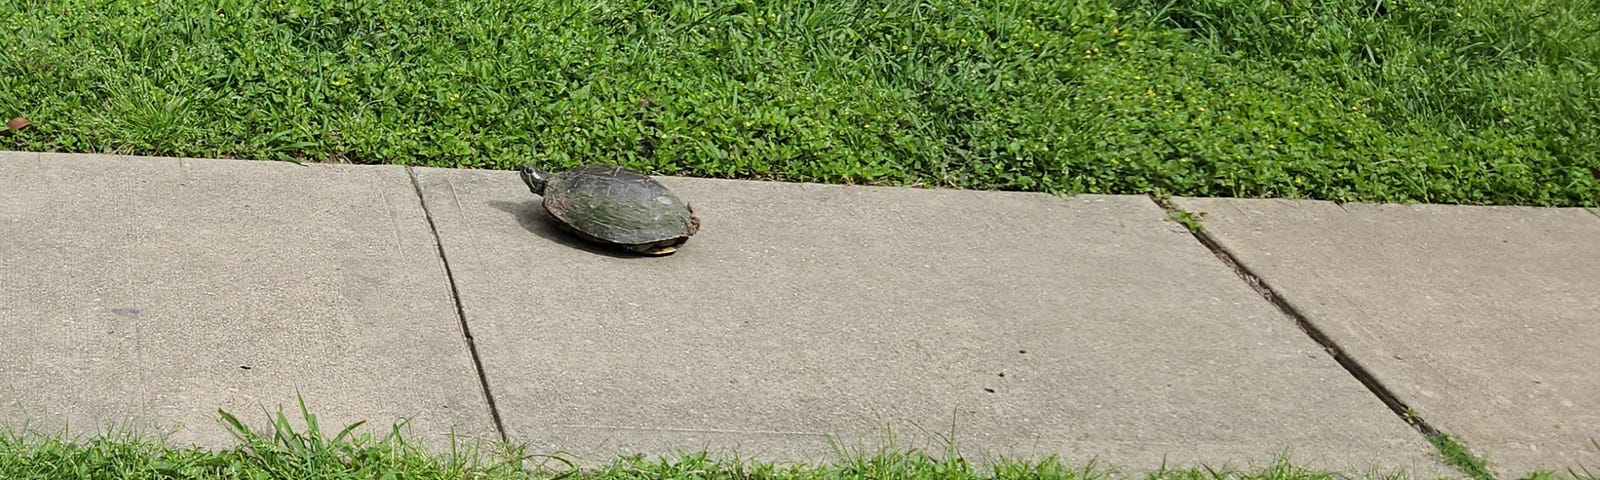 A slider turtle on a sidewalk with all its legs inside its shell. Only the head pokes out to assess the danger level.